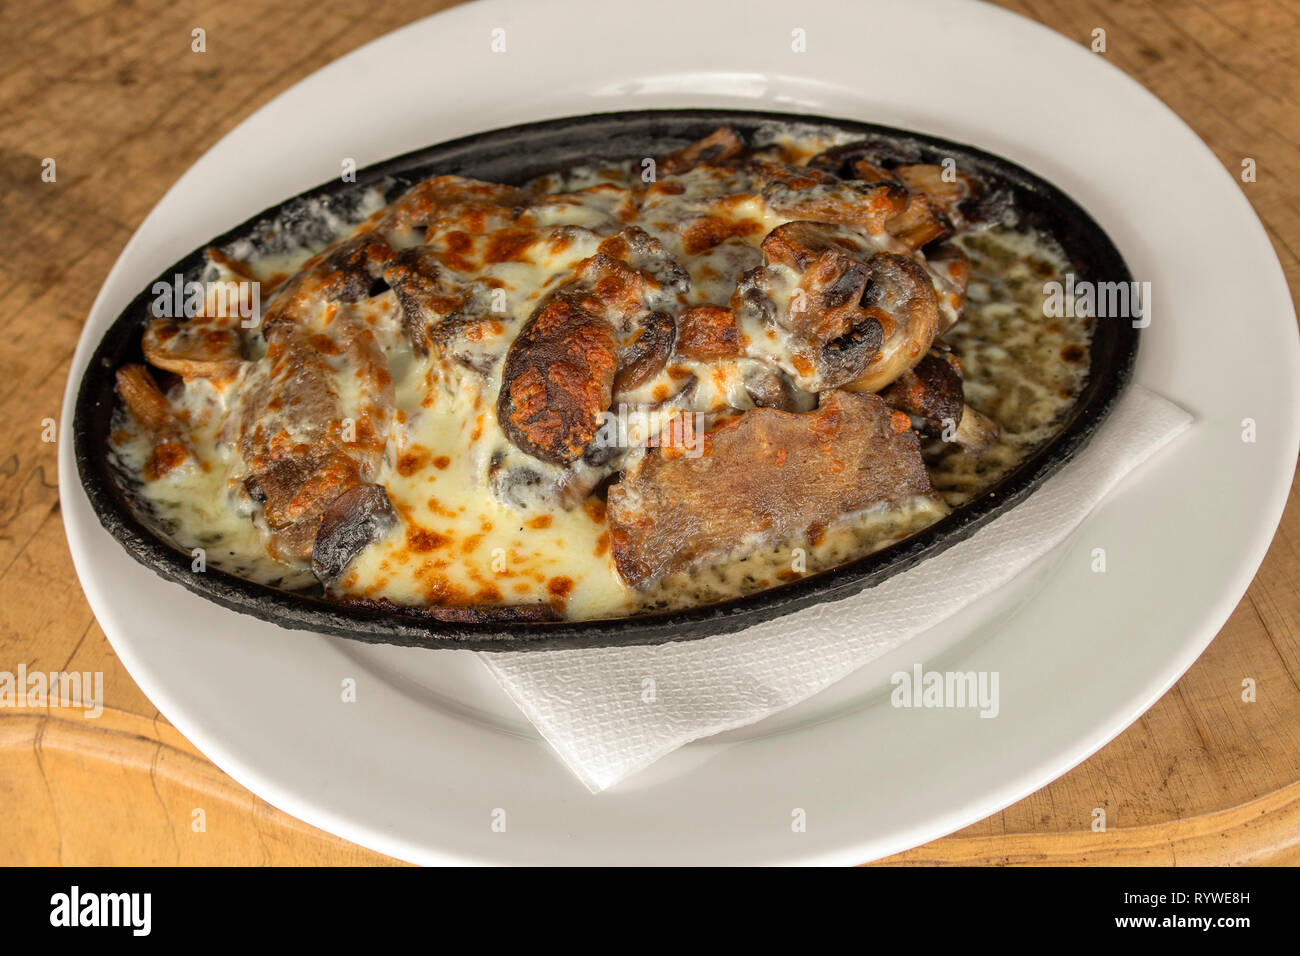 Sous vide (low temperature cooking) beef tongue with cheese and mushrooms.  Served in a ceramic vessel. On a wooden background Stock Photo - Alamy